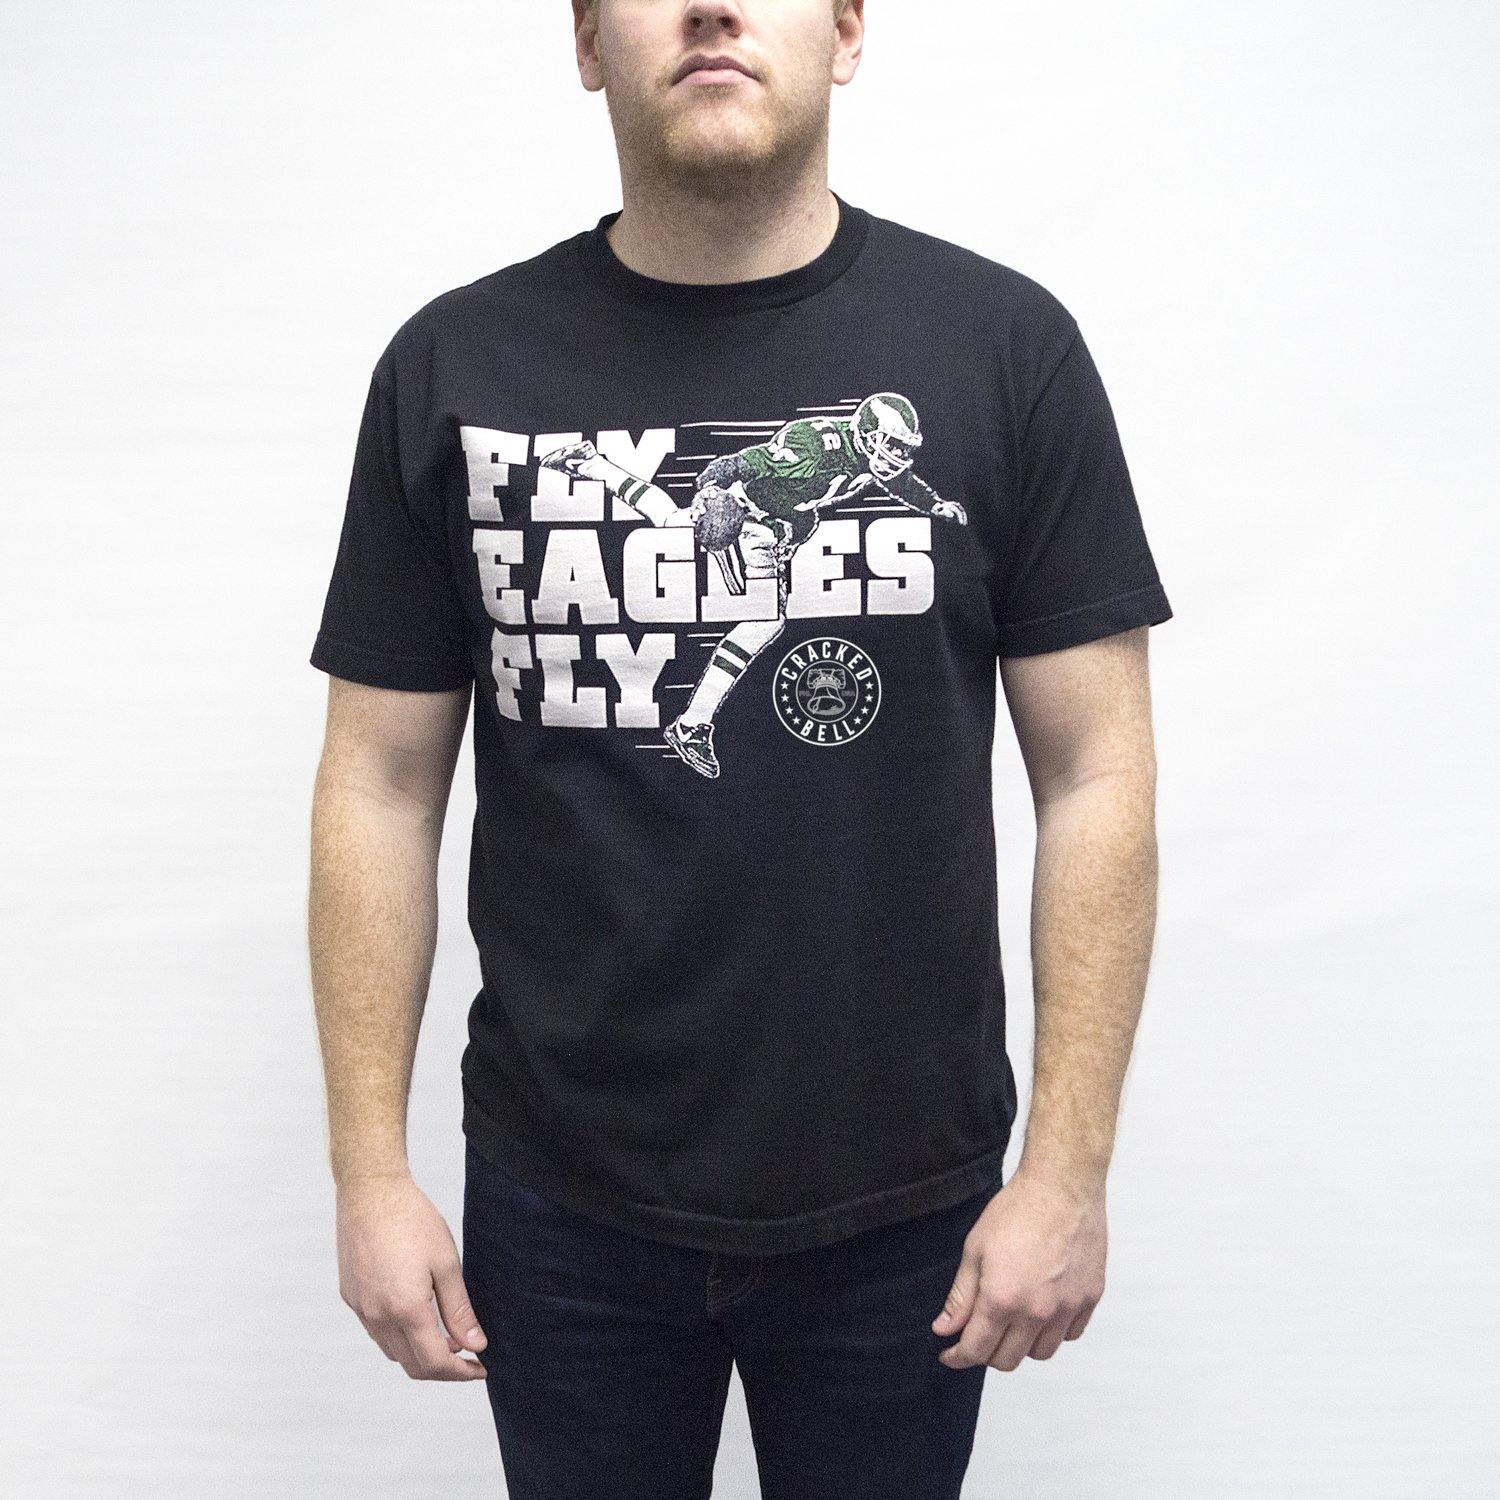 Buy – Cracked Bell "Fly Eagles Fly" Shirt – Band & Music Merch – Cold Cuts Merch